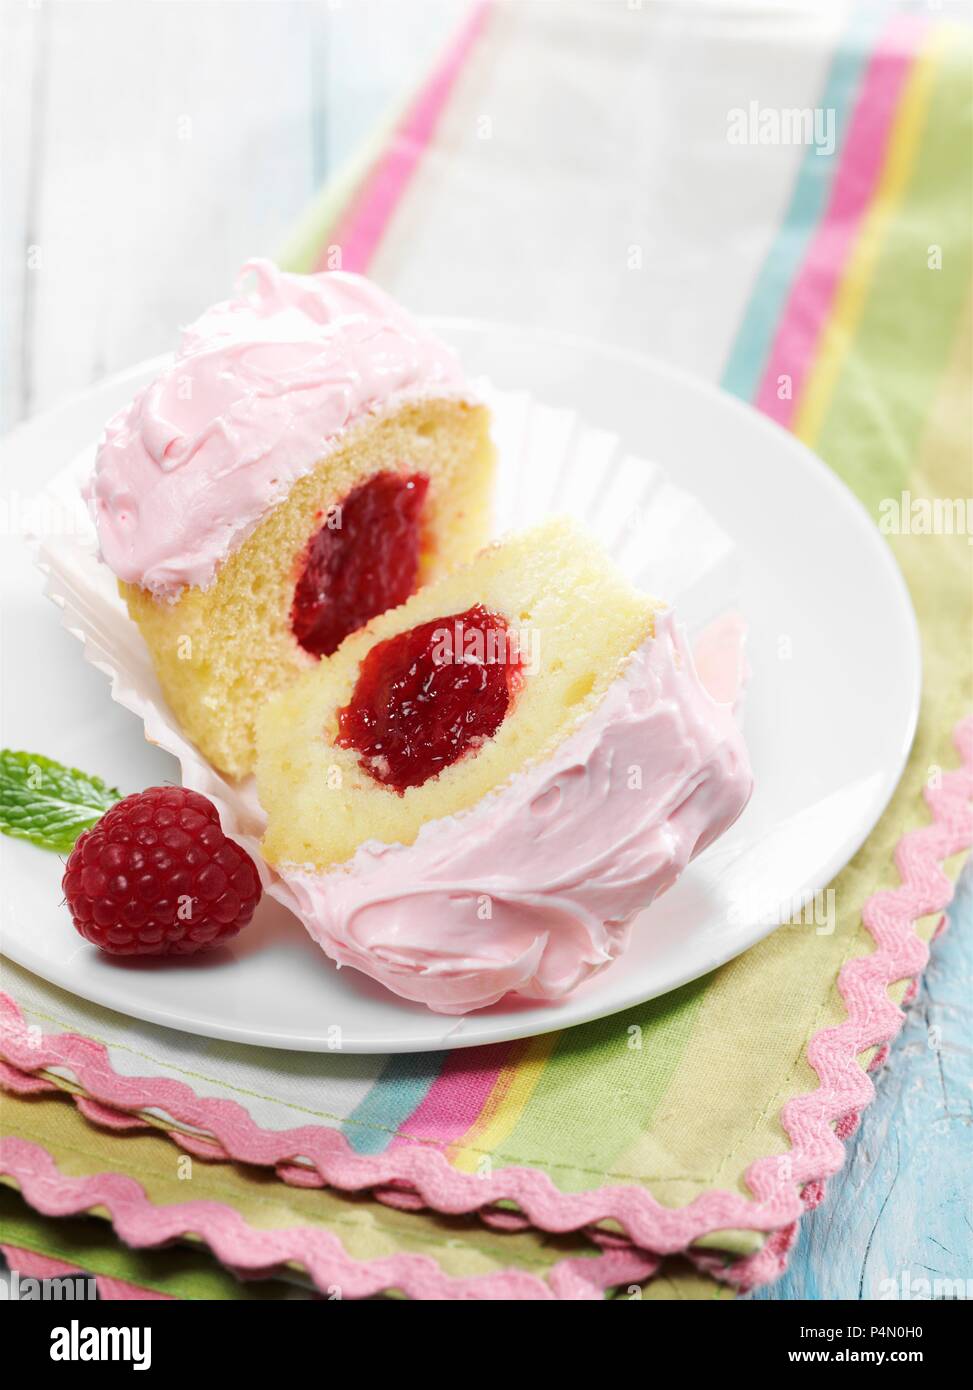 Vanilla cupcake with raspberry jam center and pink frosting Stock Photo